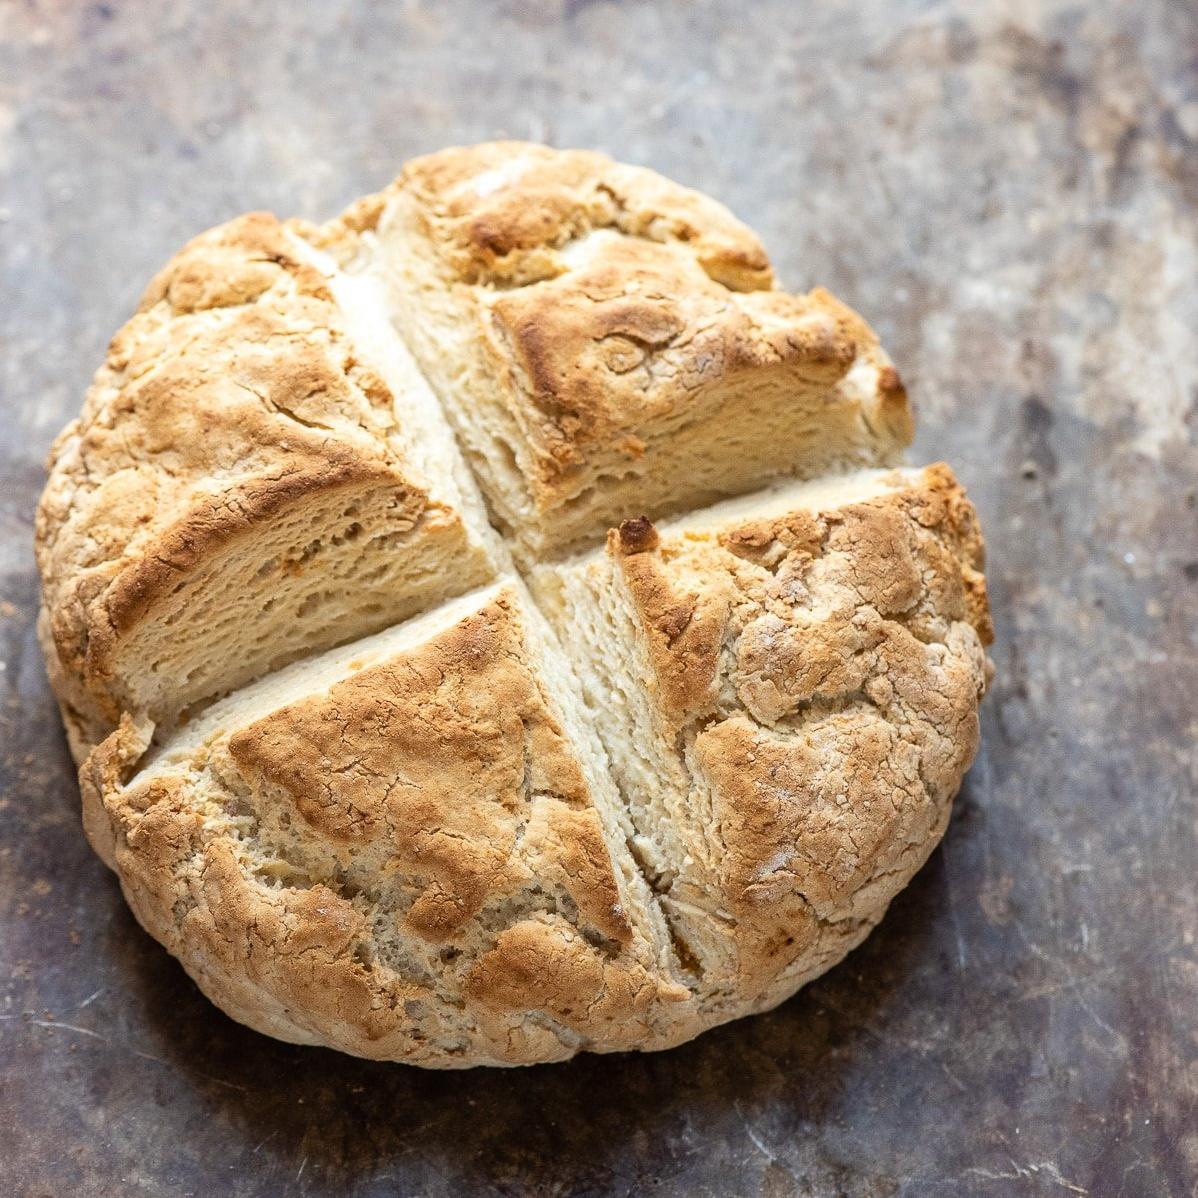  One bite of this bread and you'll be transported to the Emerald Isle.